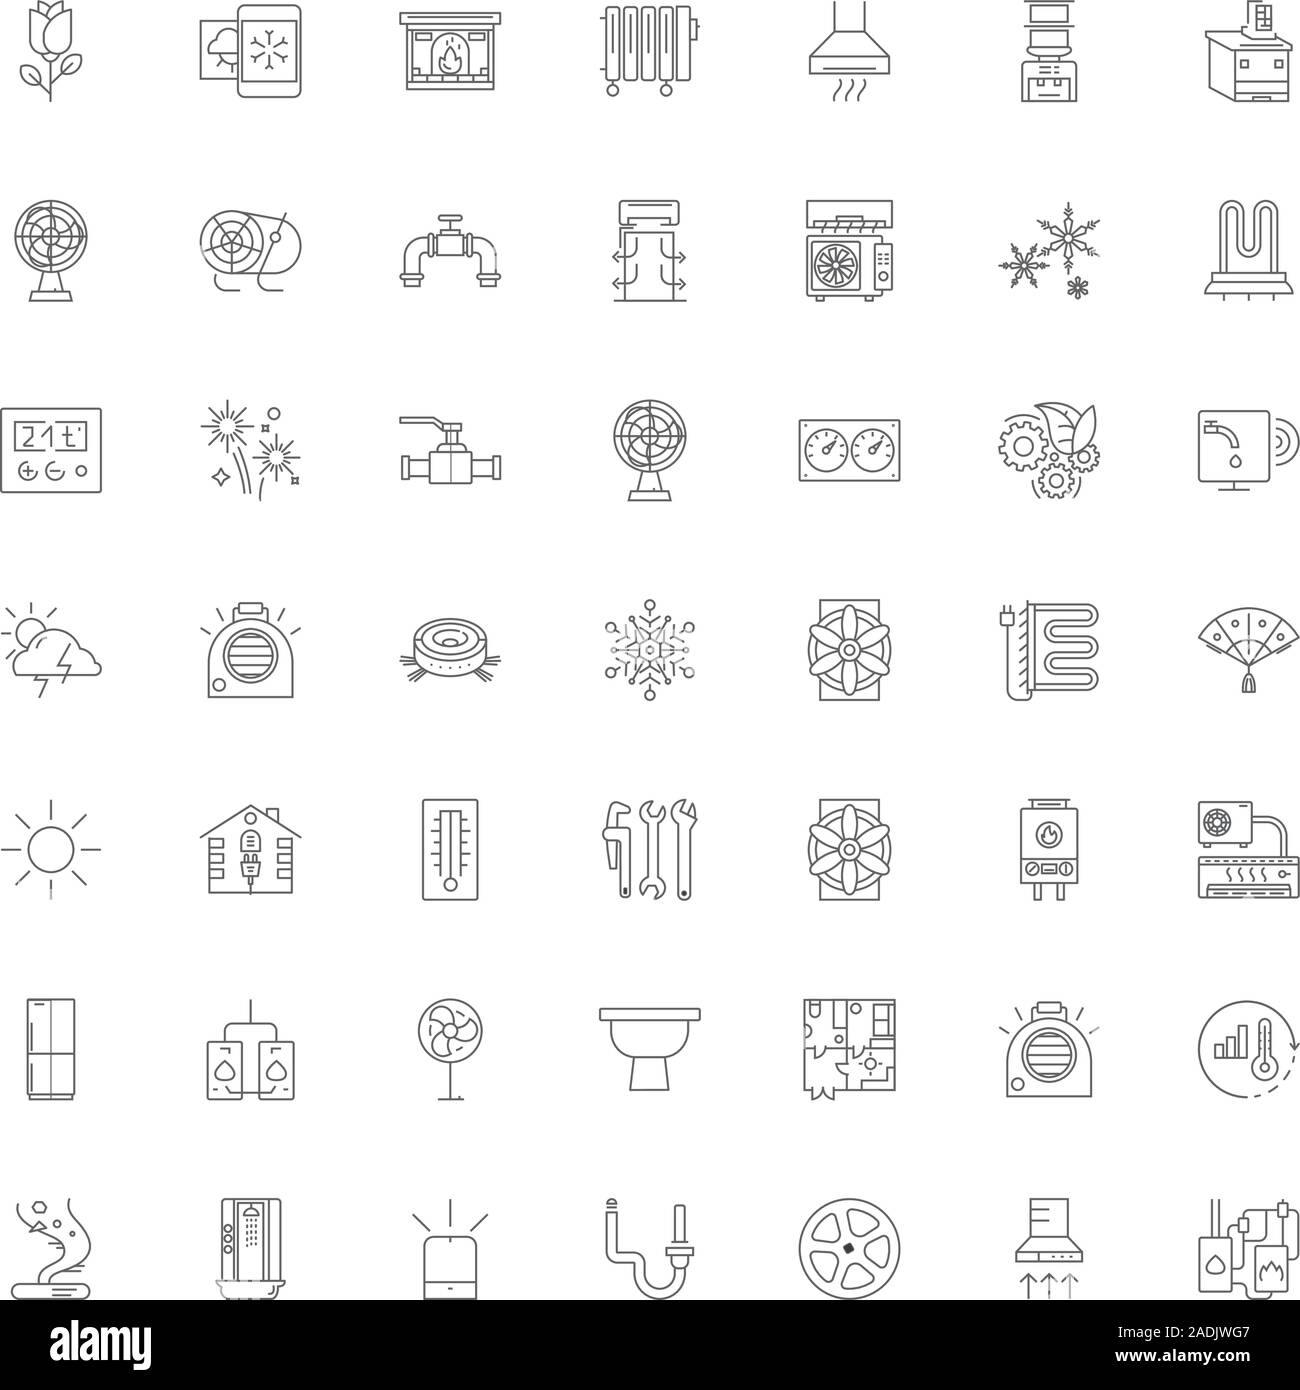 Air cleaning line icons, signs, symbols vector, linear illustration set Stock Vector